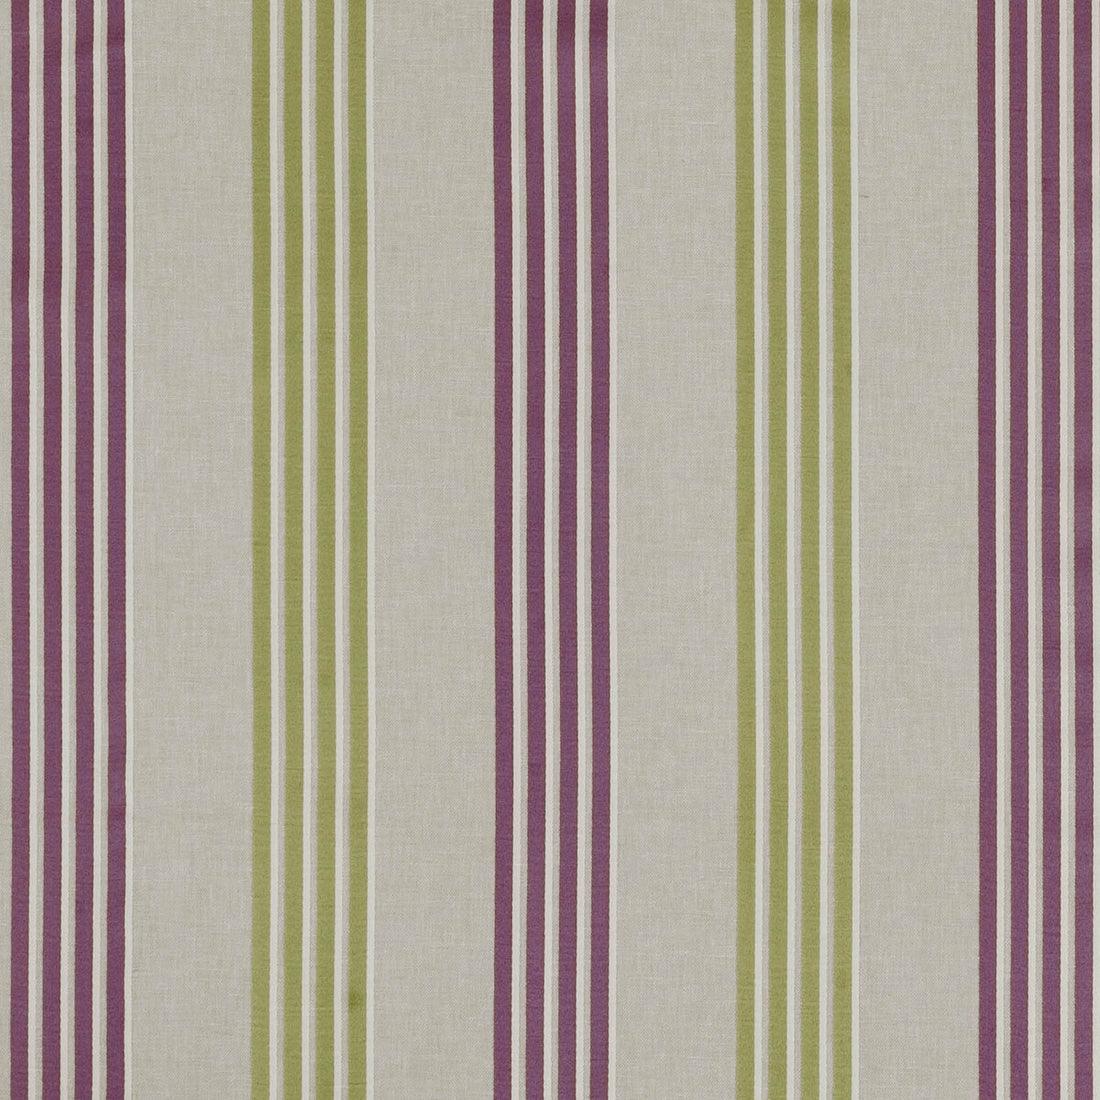 Wensley fabric in violet/citrus color - pattern F0941/06.CAC.0 - by Clarke And Clarke in the Clarke &amp; Clarke Richmond collection